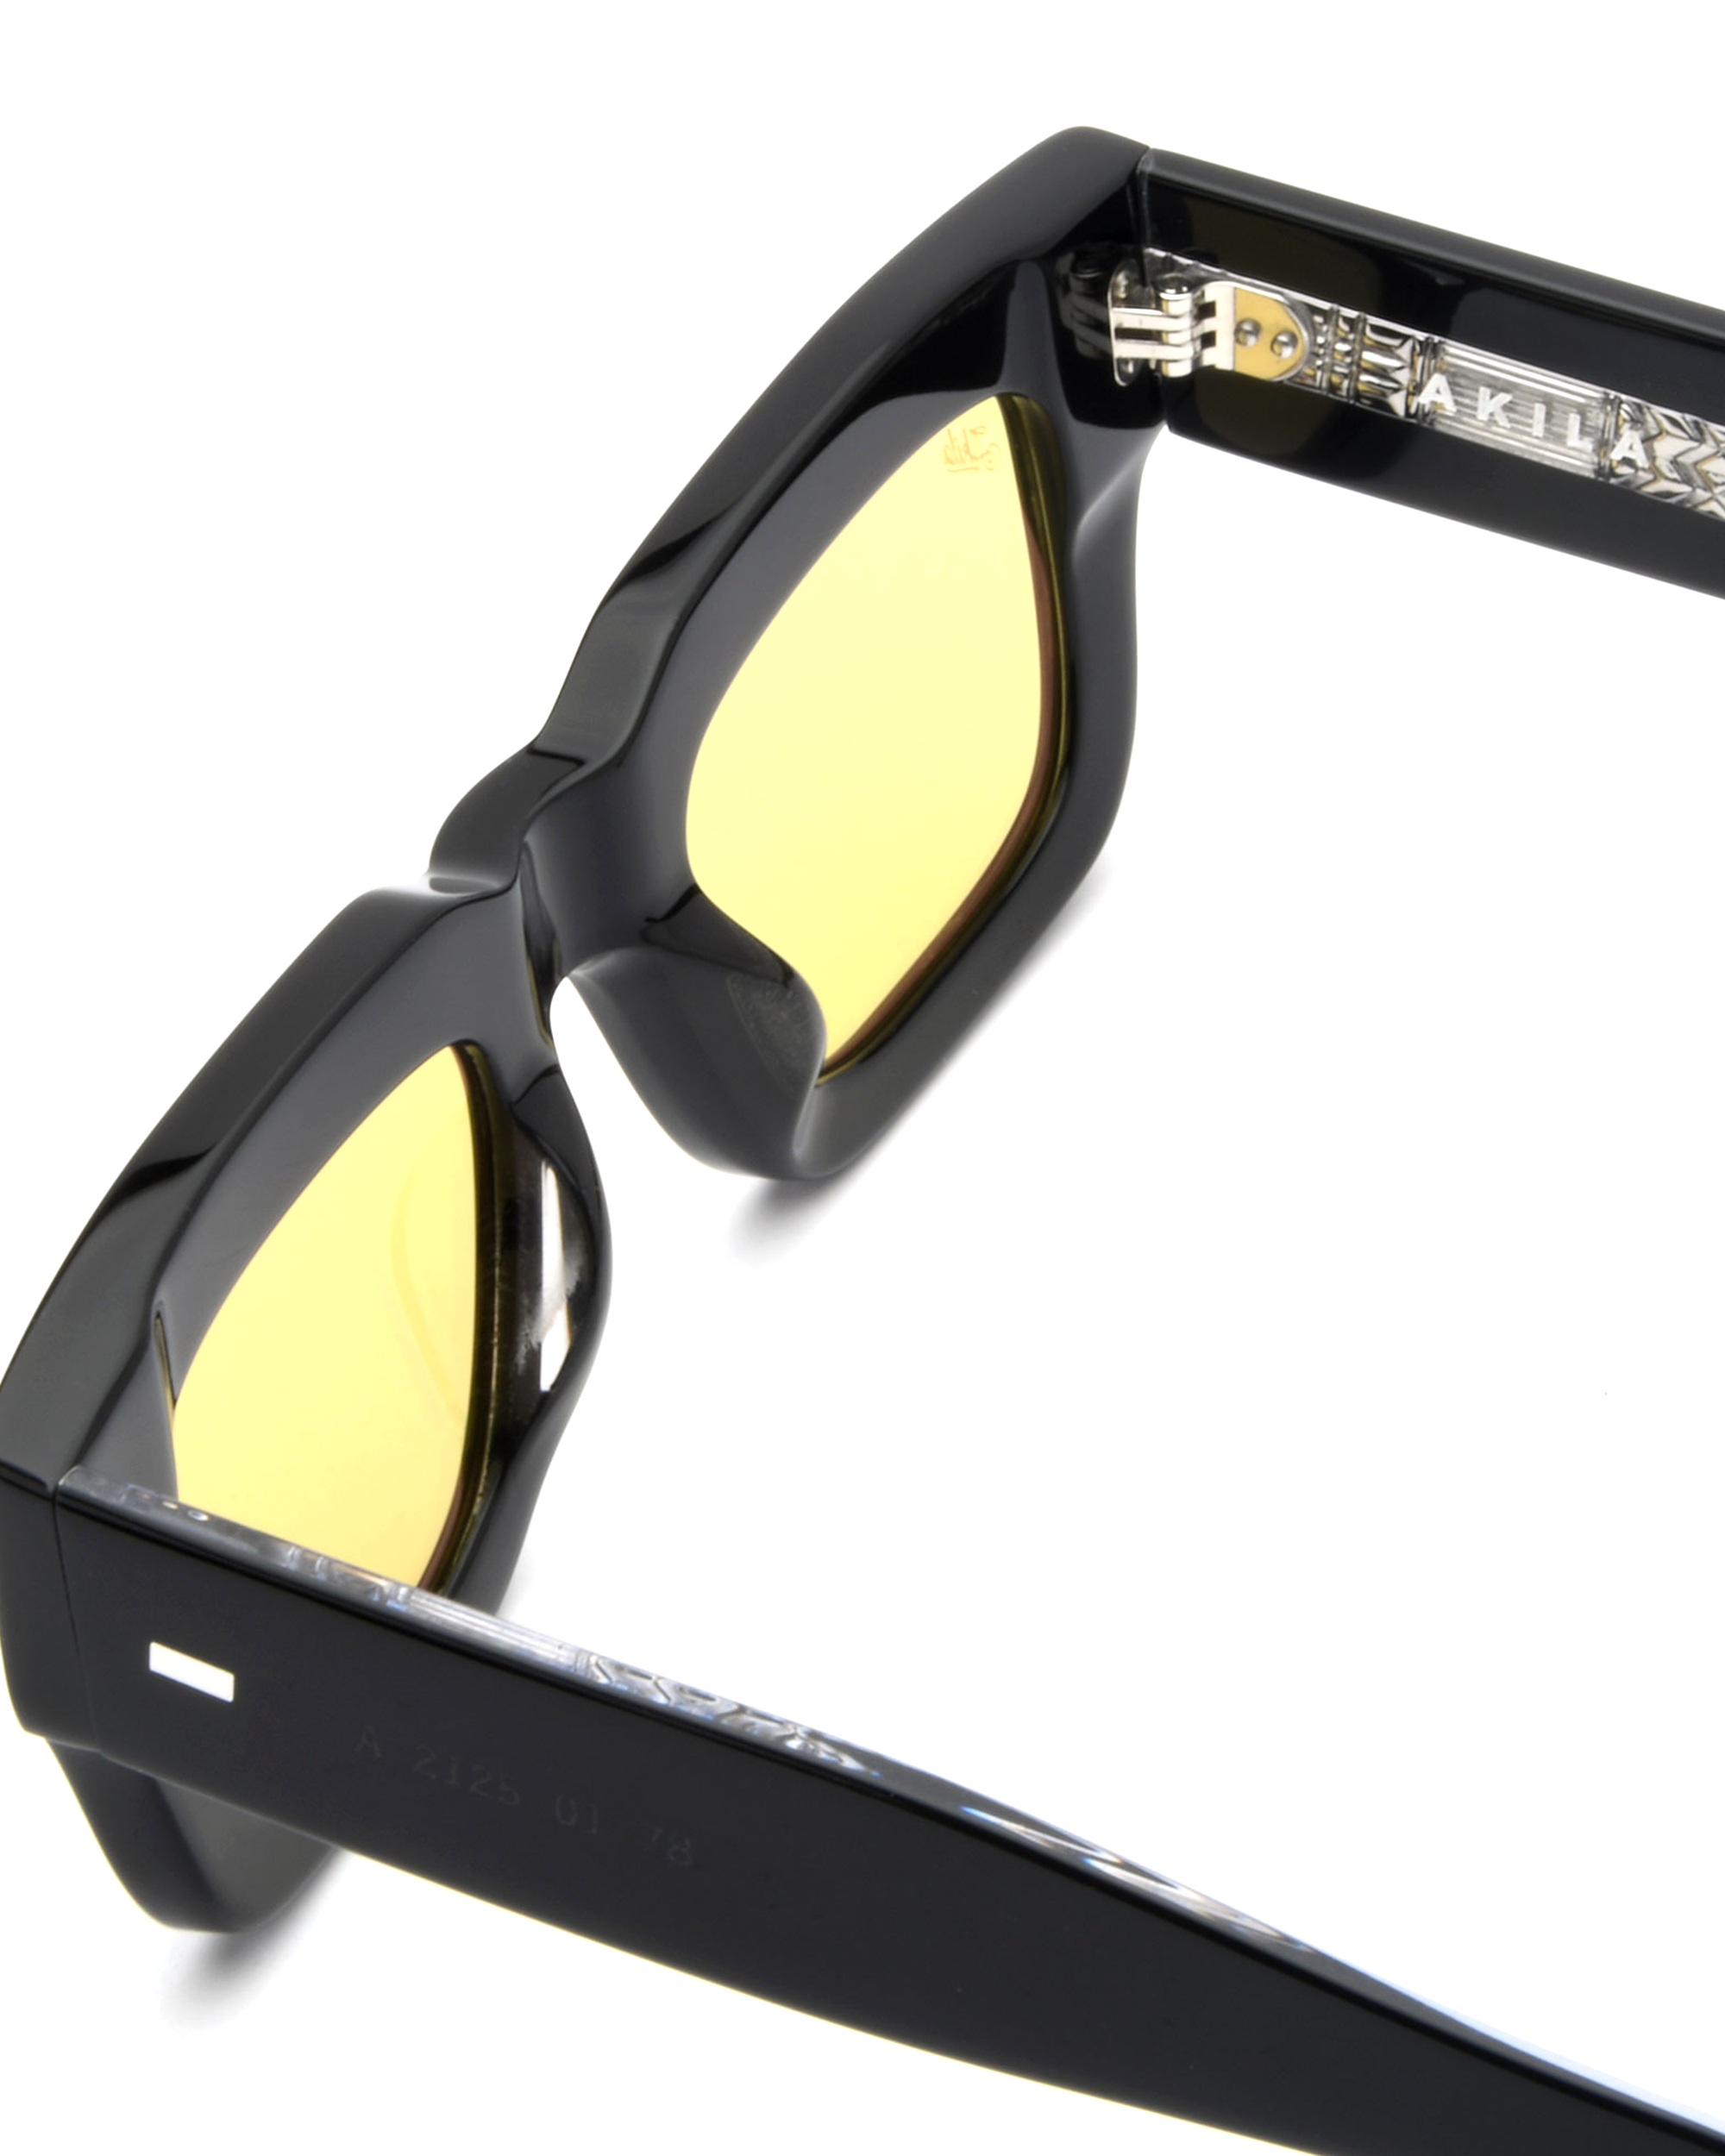 Ares - Black / Yellow / Silver